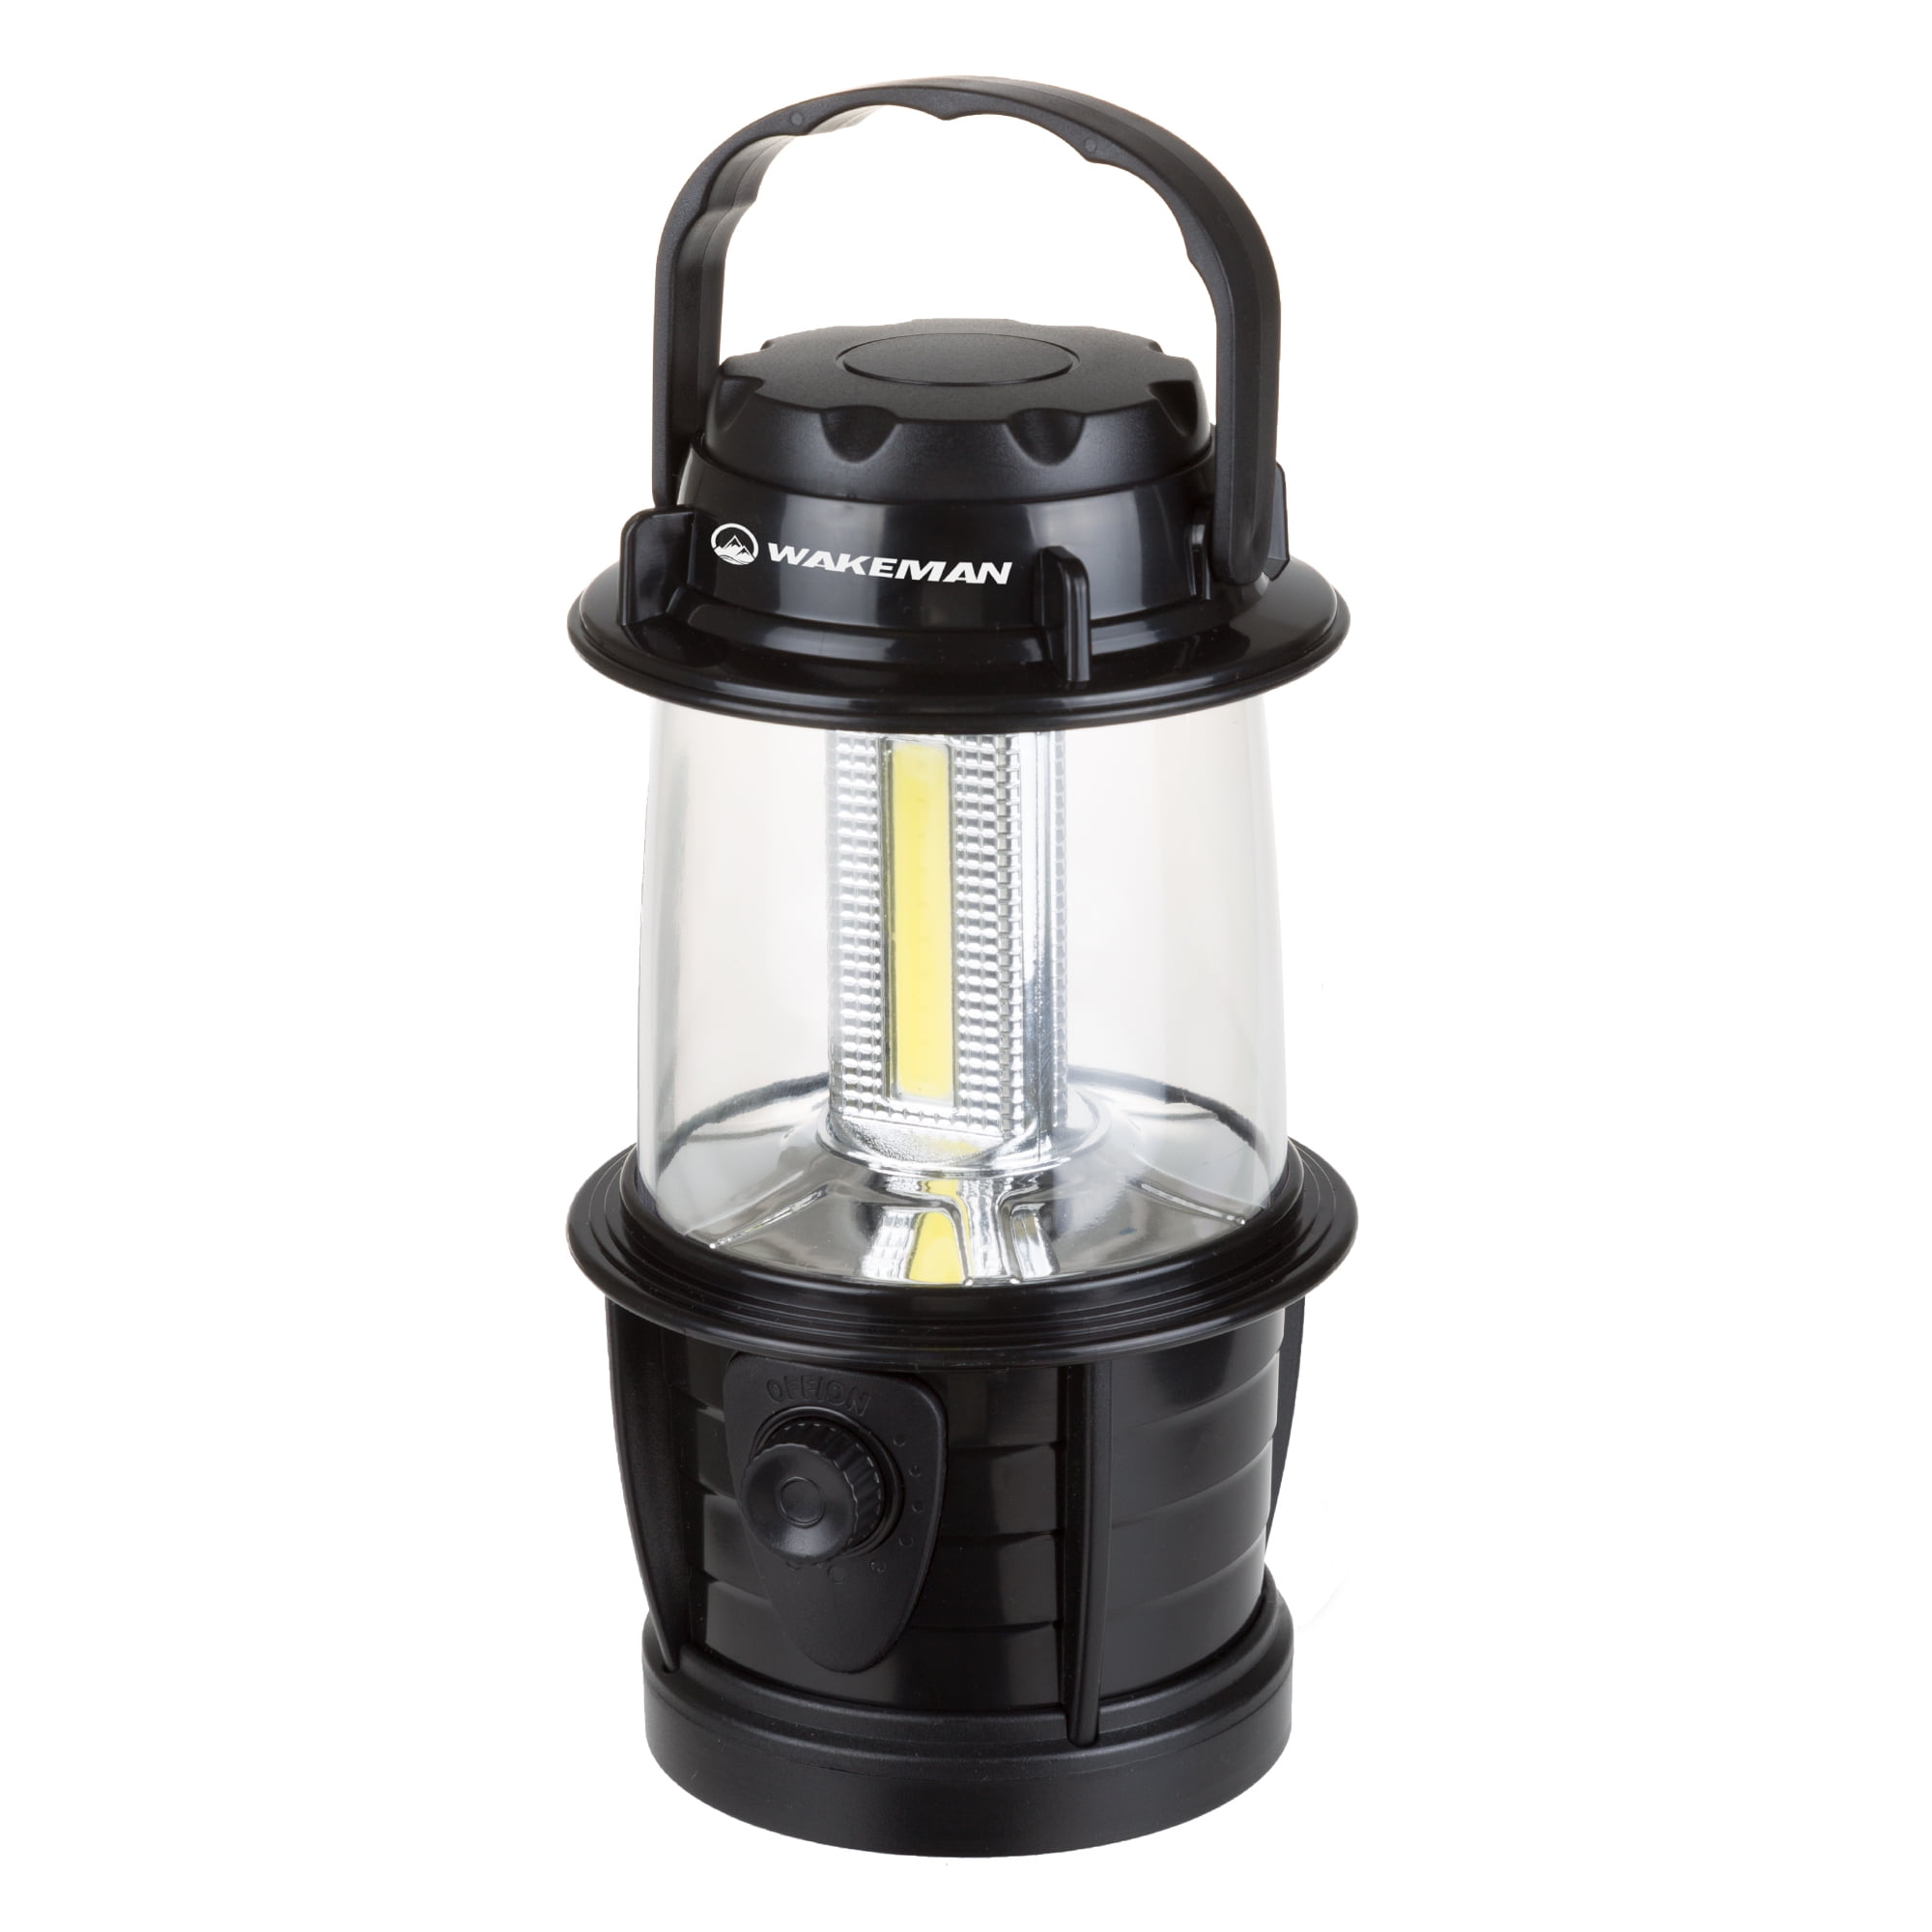 TERWOK led camping lantern rechargeable - waterproof portable camping light  electric lantern flashlight combo for camping emergency